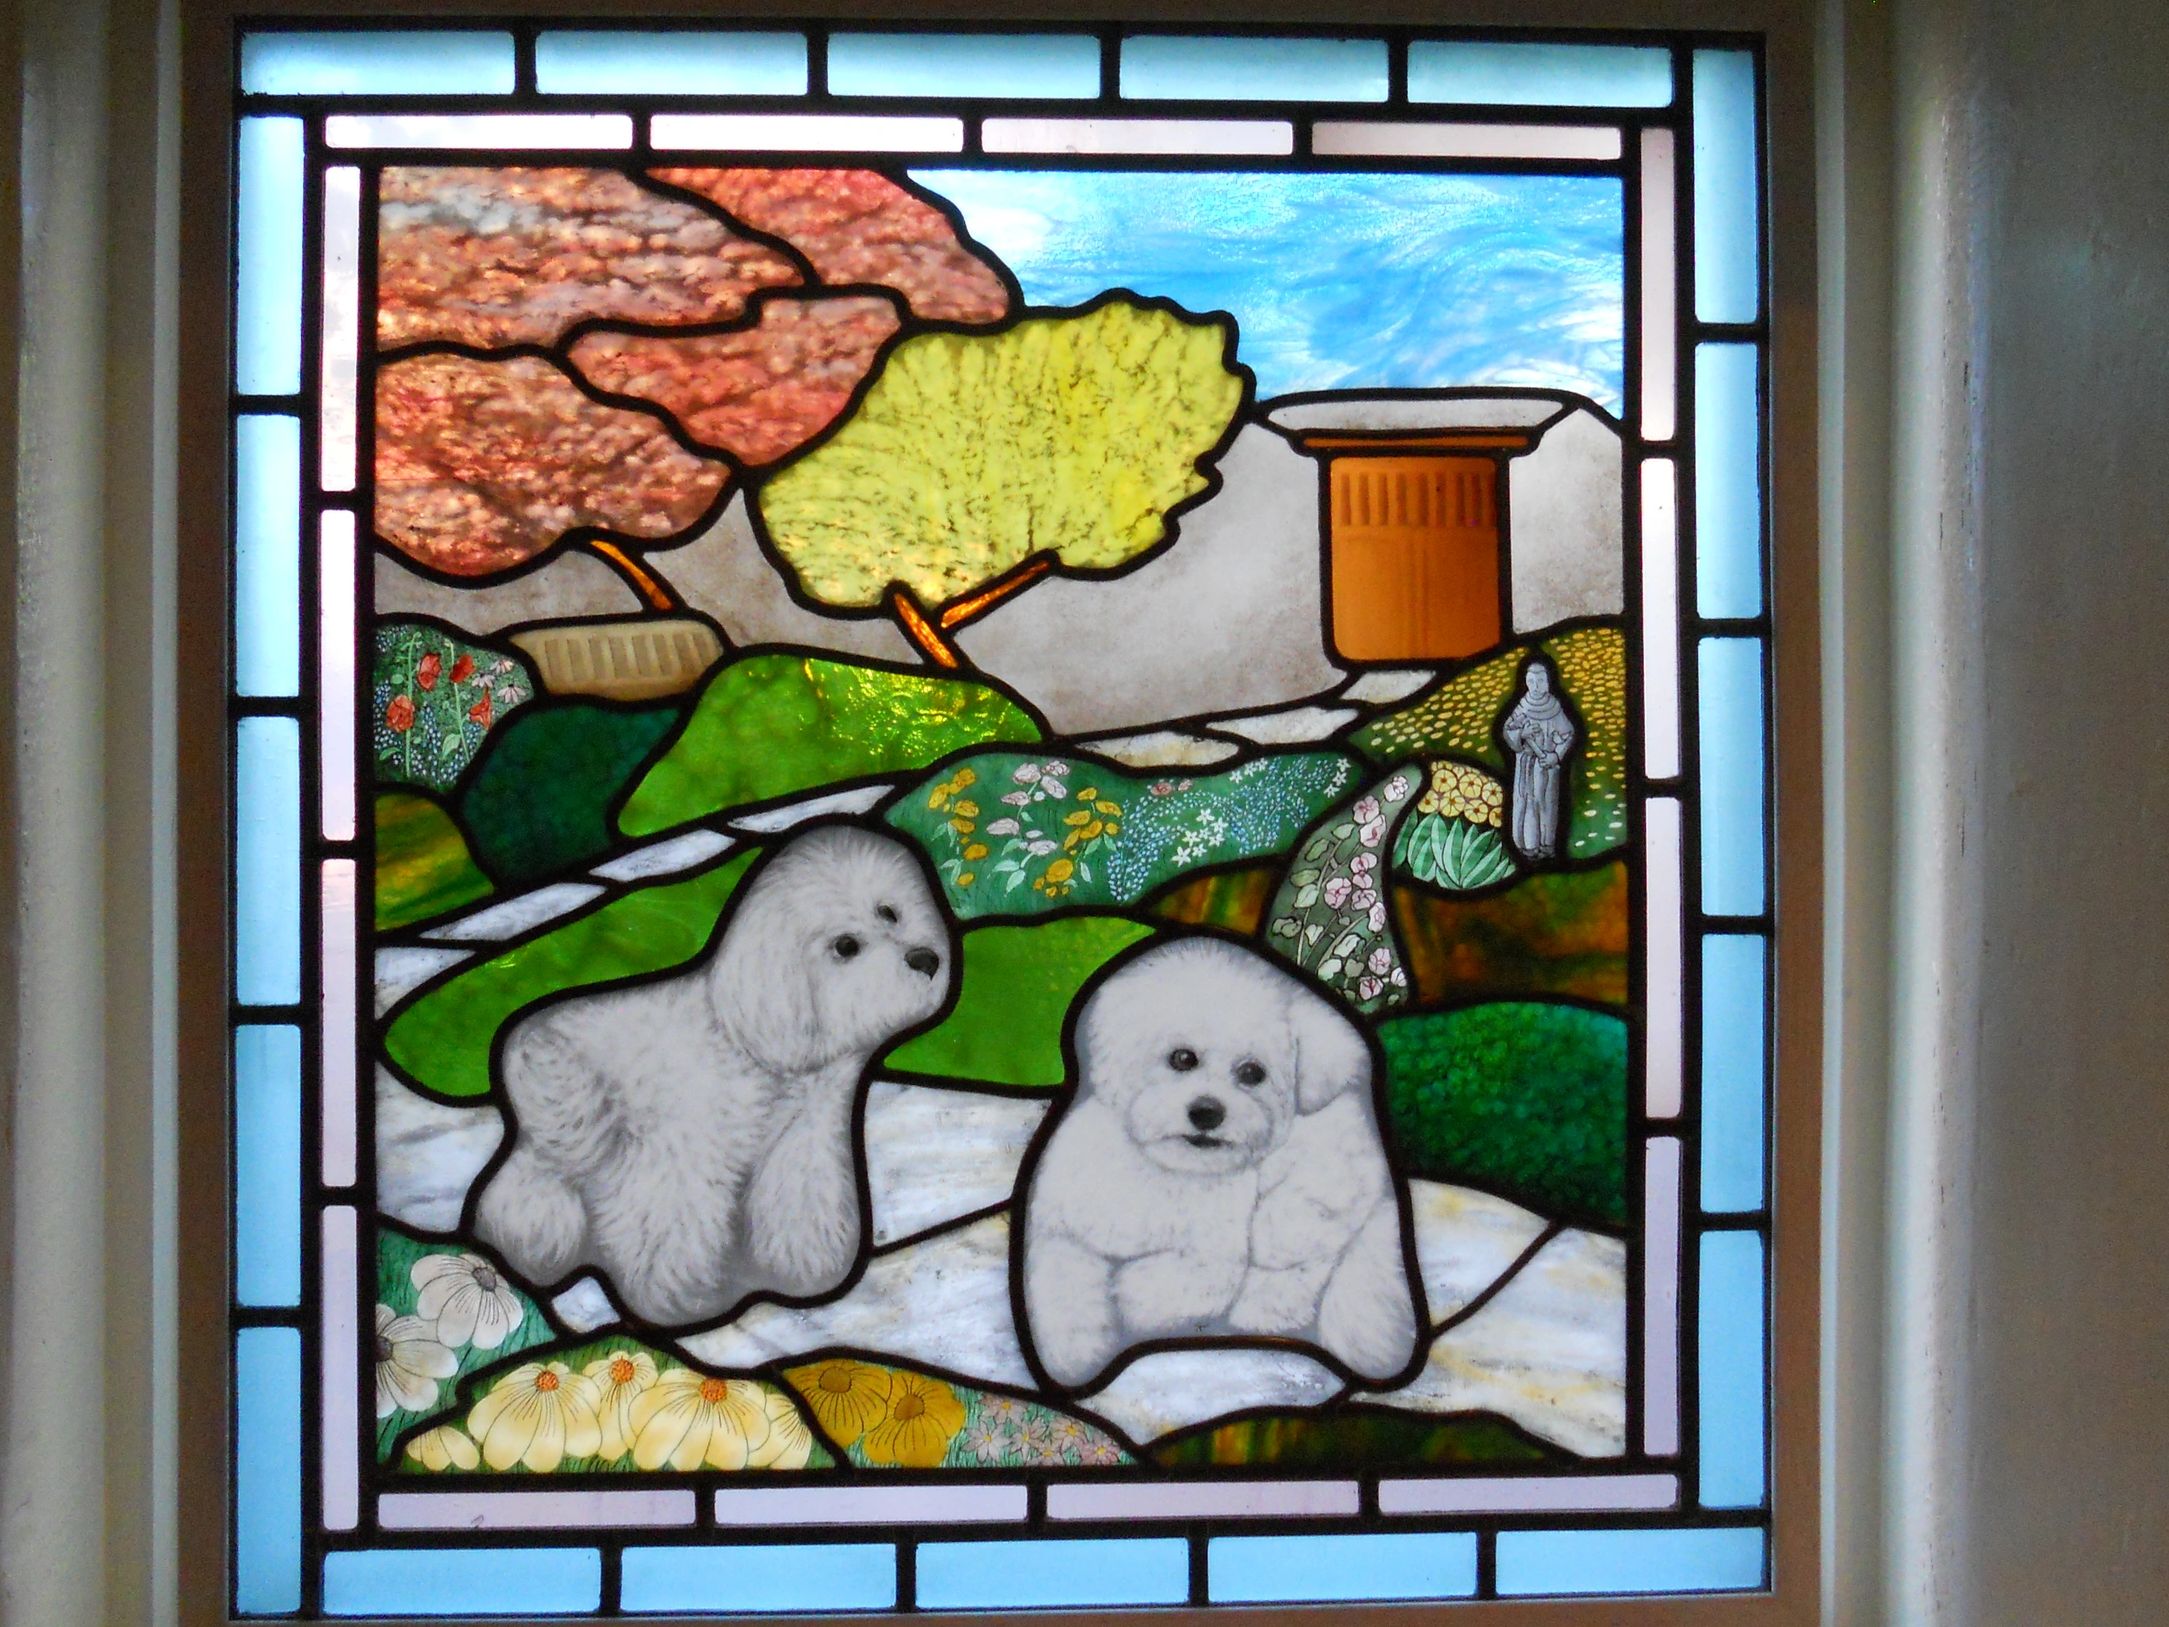 two furry white dogs painted on glass in a backyard setting, greens, yellows, and golds